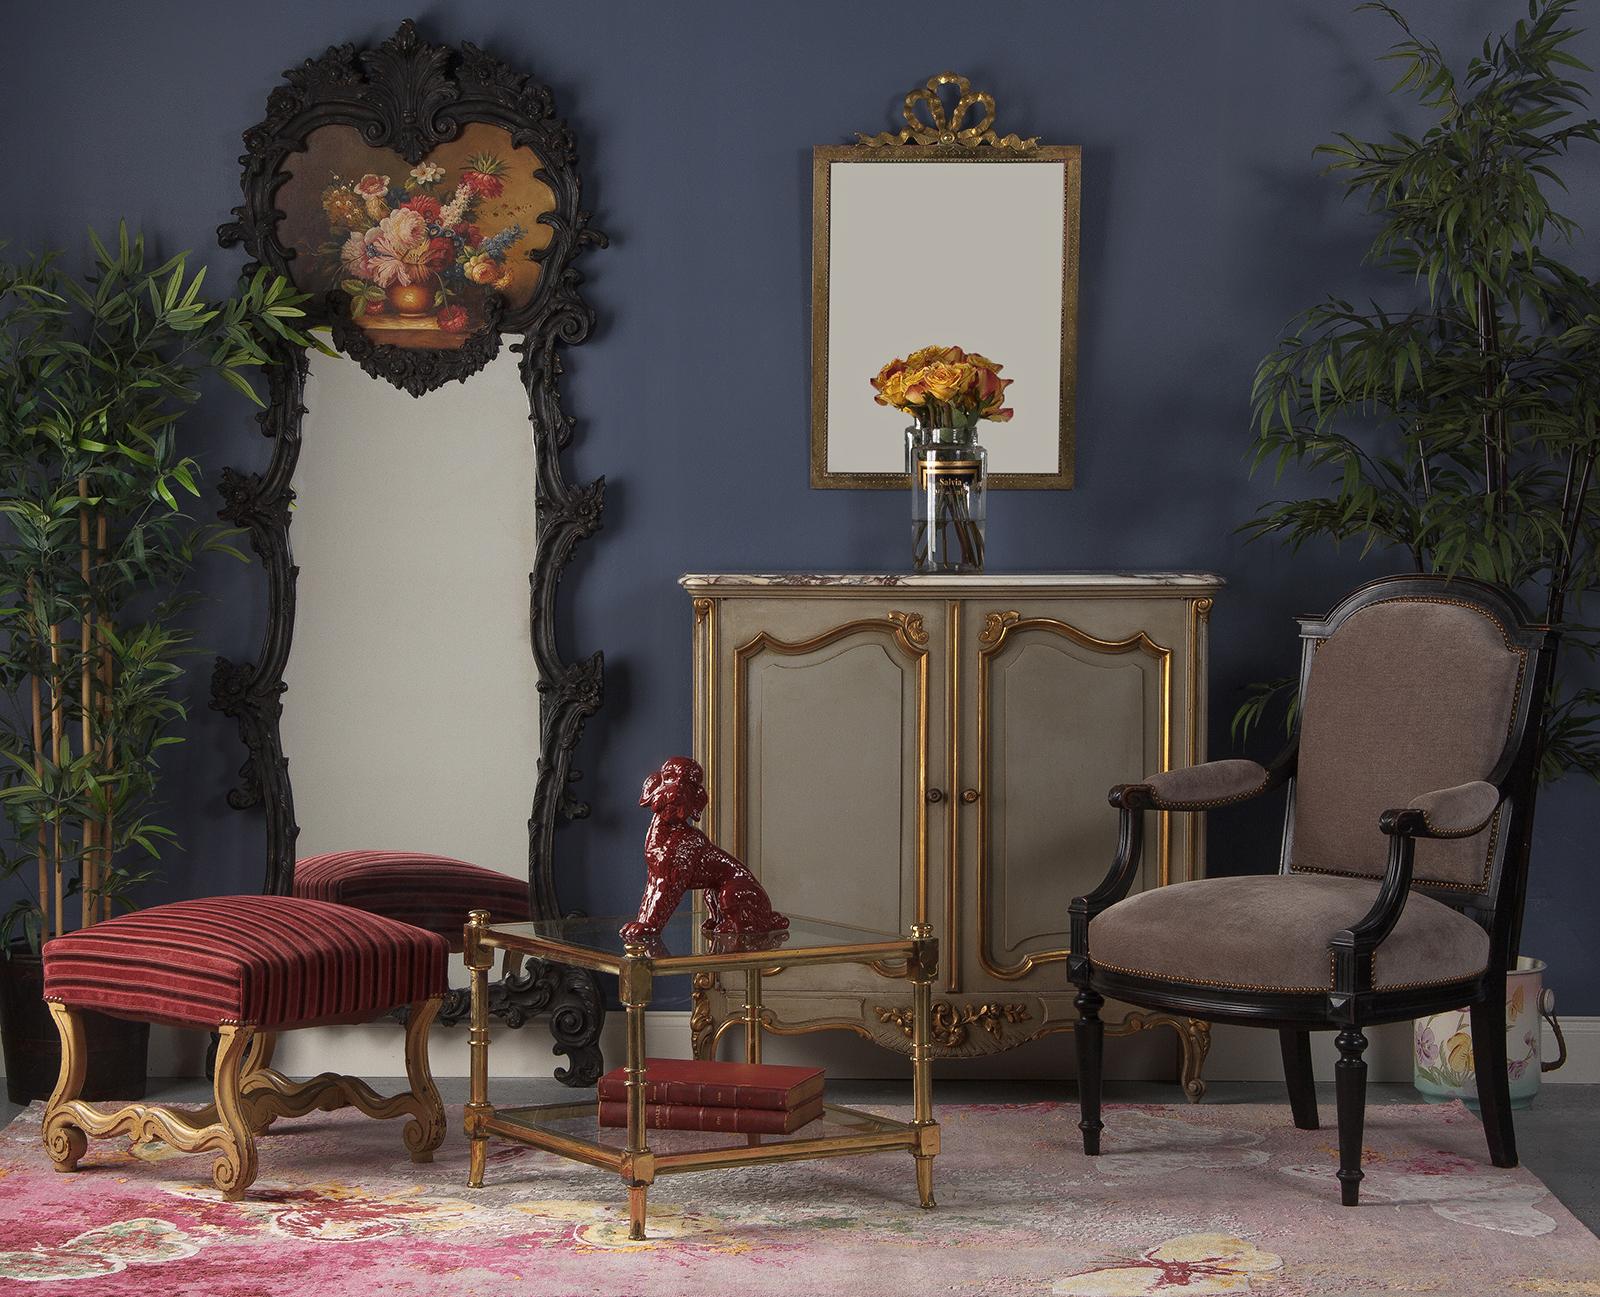 A French Rococo style full length mirror that was painted in black over the original giltwood frame. The frame has abundant carvings of foliage, roses, acanthus leaves and scrolls. The painting represents a vase with colorful flowers. A stylish